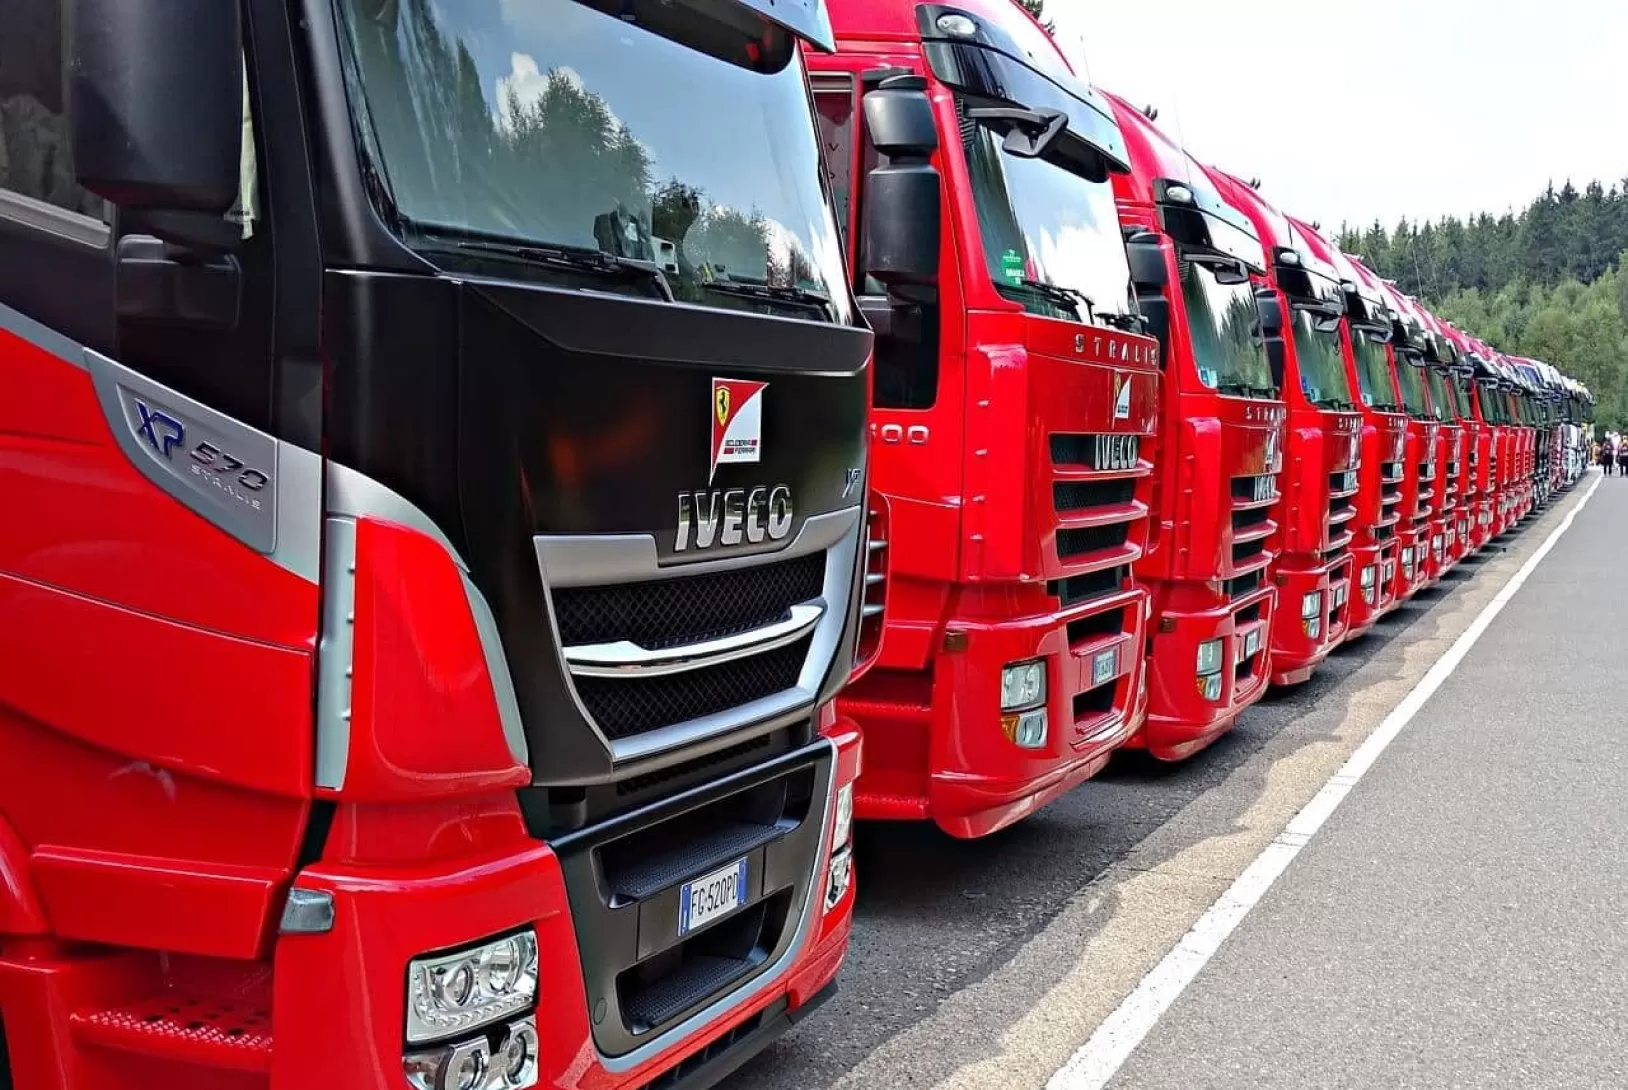 Red Iveco Trucks on the parking